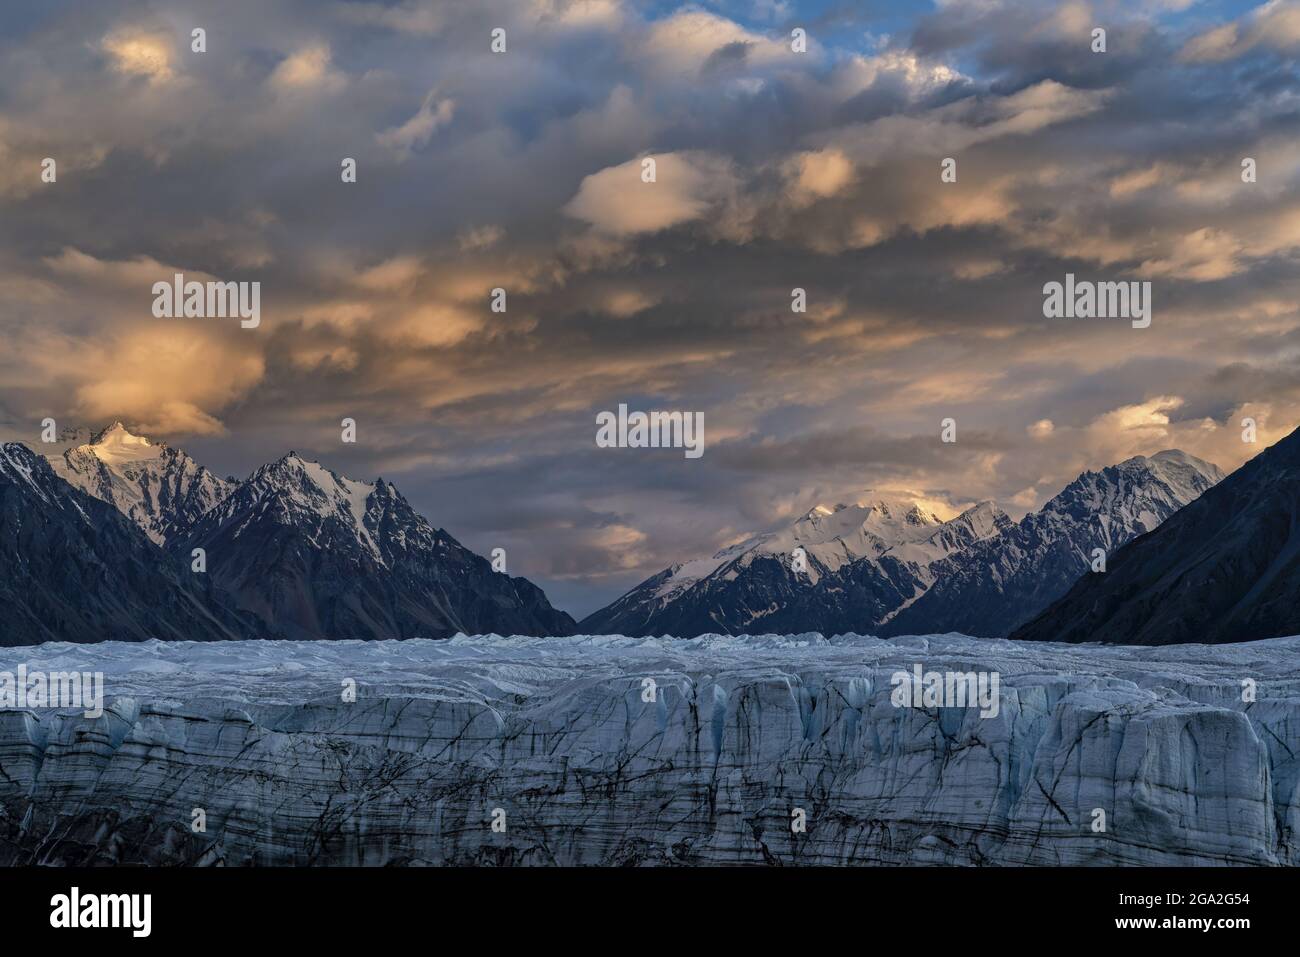 The vast Donjek Glacier in Kluane National Park with the sunset lighting up the clouds over the snowcapped mountaintops creating a stunning image, ... Stock Photo